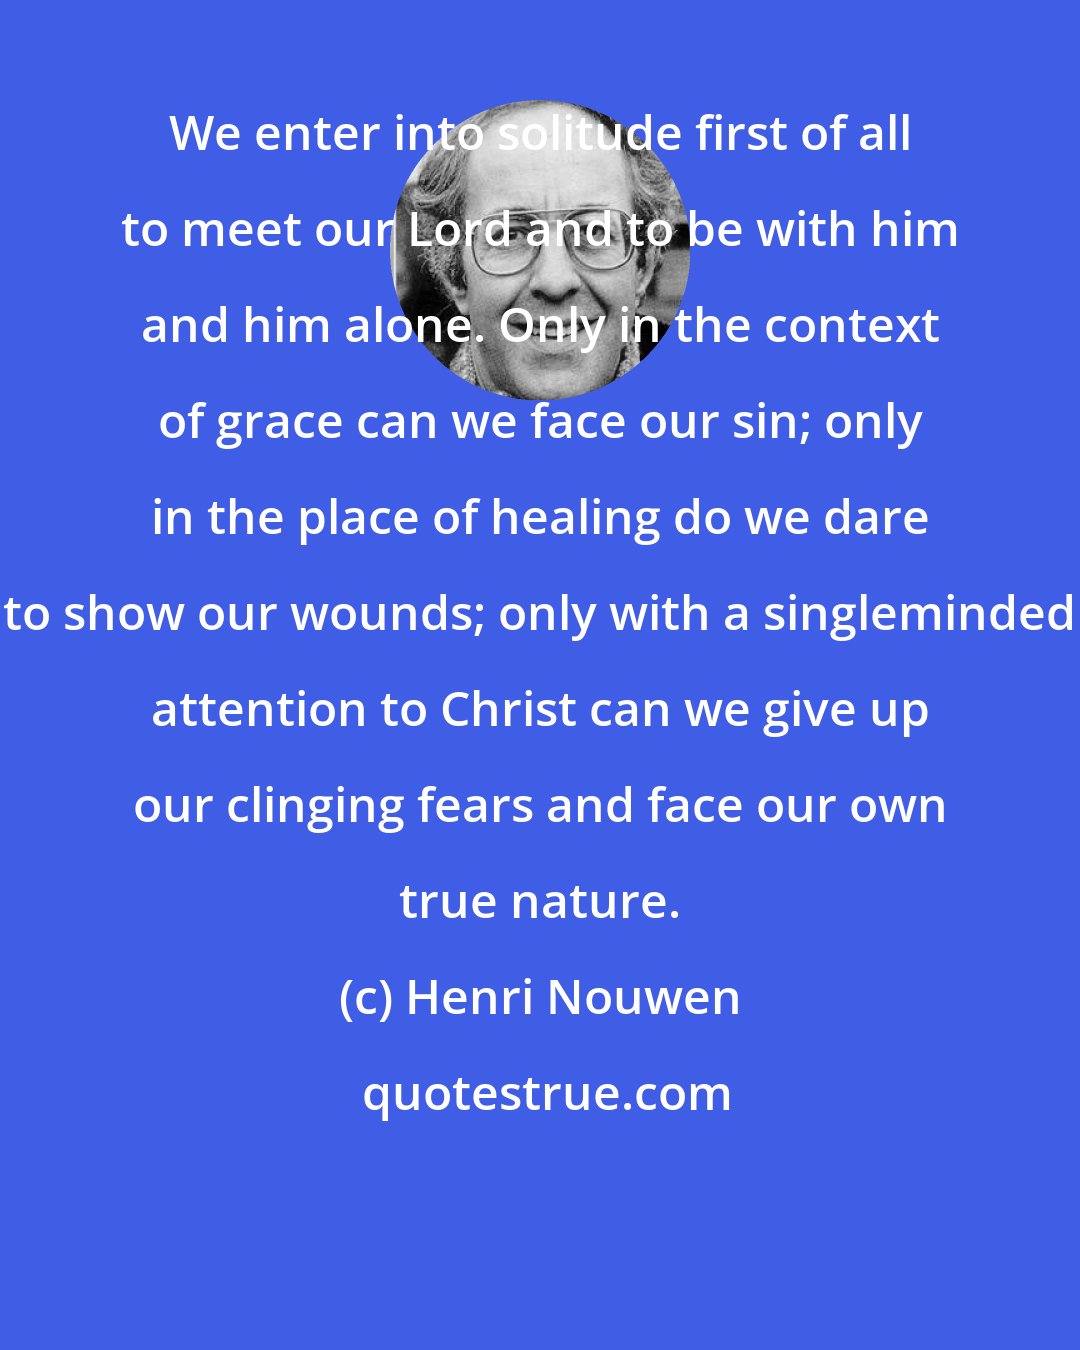 Henri Nouwen: We enter into solitude first of all to meet our Lord and to be with him and him alone. Only in the context of grace can we face our sin; only in the place of healing do we dare to show our wounds; only with a singleminded attention to Christ can we give up our clinging fears and face our own true nature.